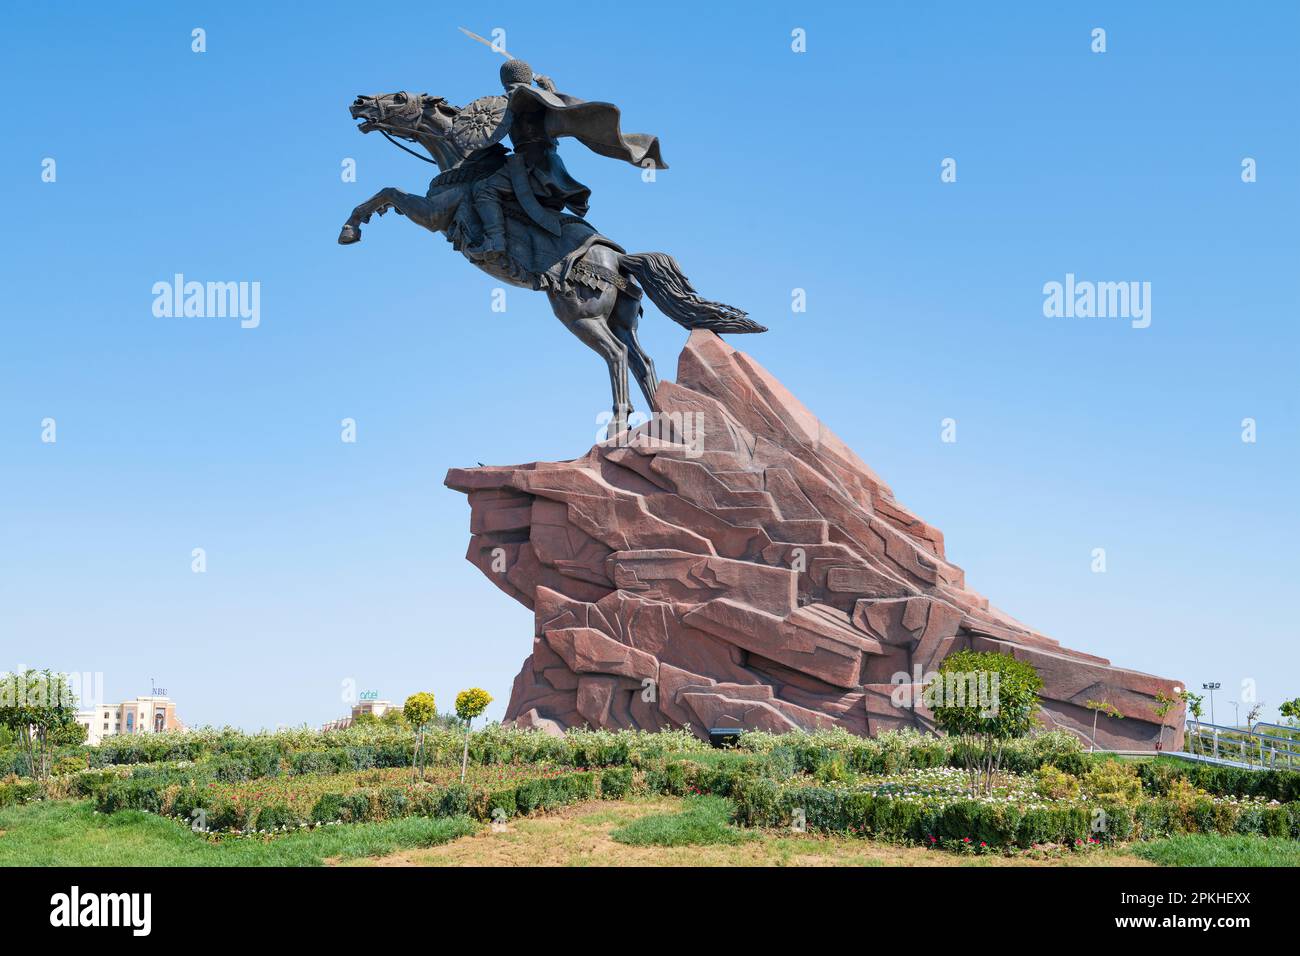 URGENCH, UZBEKISTAN - SEPTEMBER 07, 2022: View of the monument to the ruler and commander Jalal ad-Din Manguberdy on a sunny September day Stock Photo